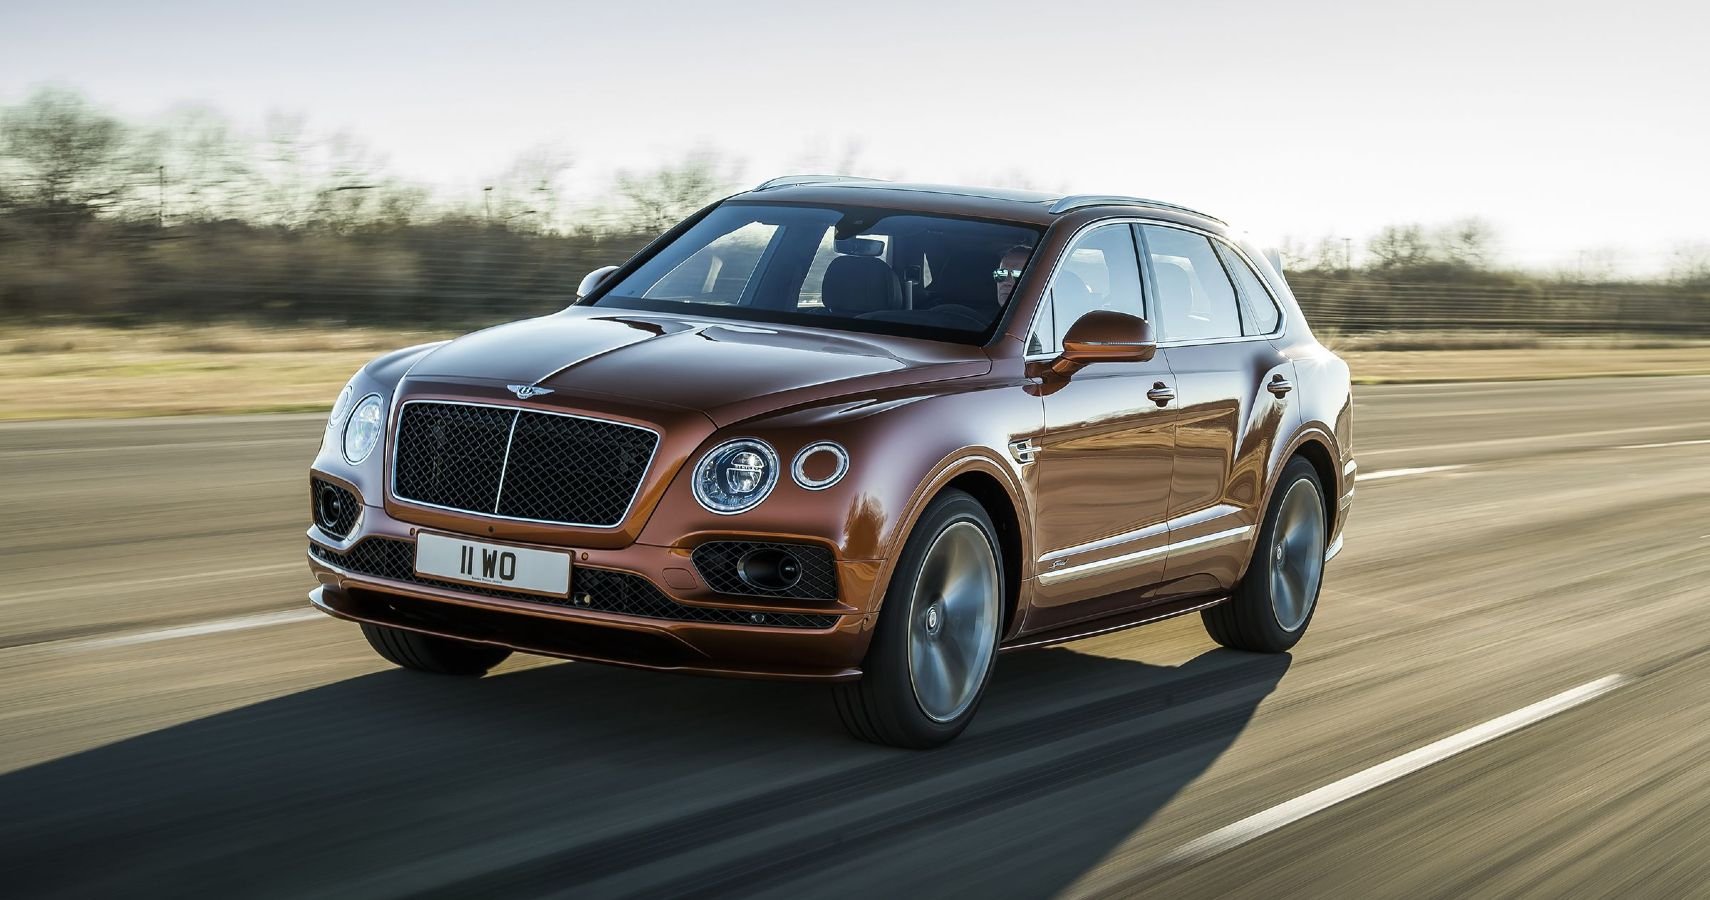 Here's Why The Bentley Bentayga Is The World's Most Luxurious Hybrid SUV